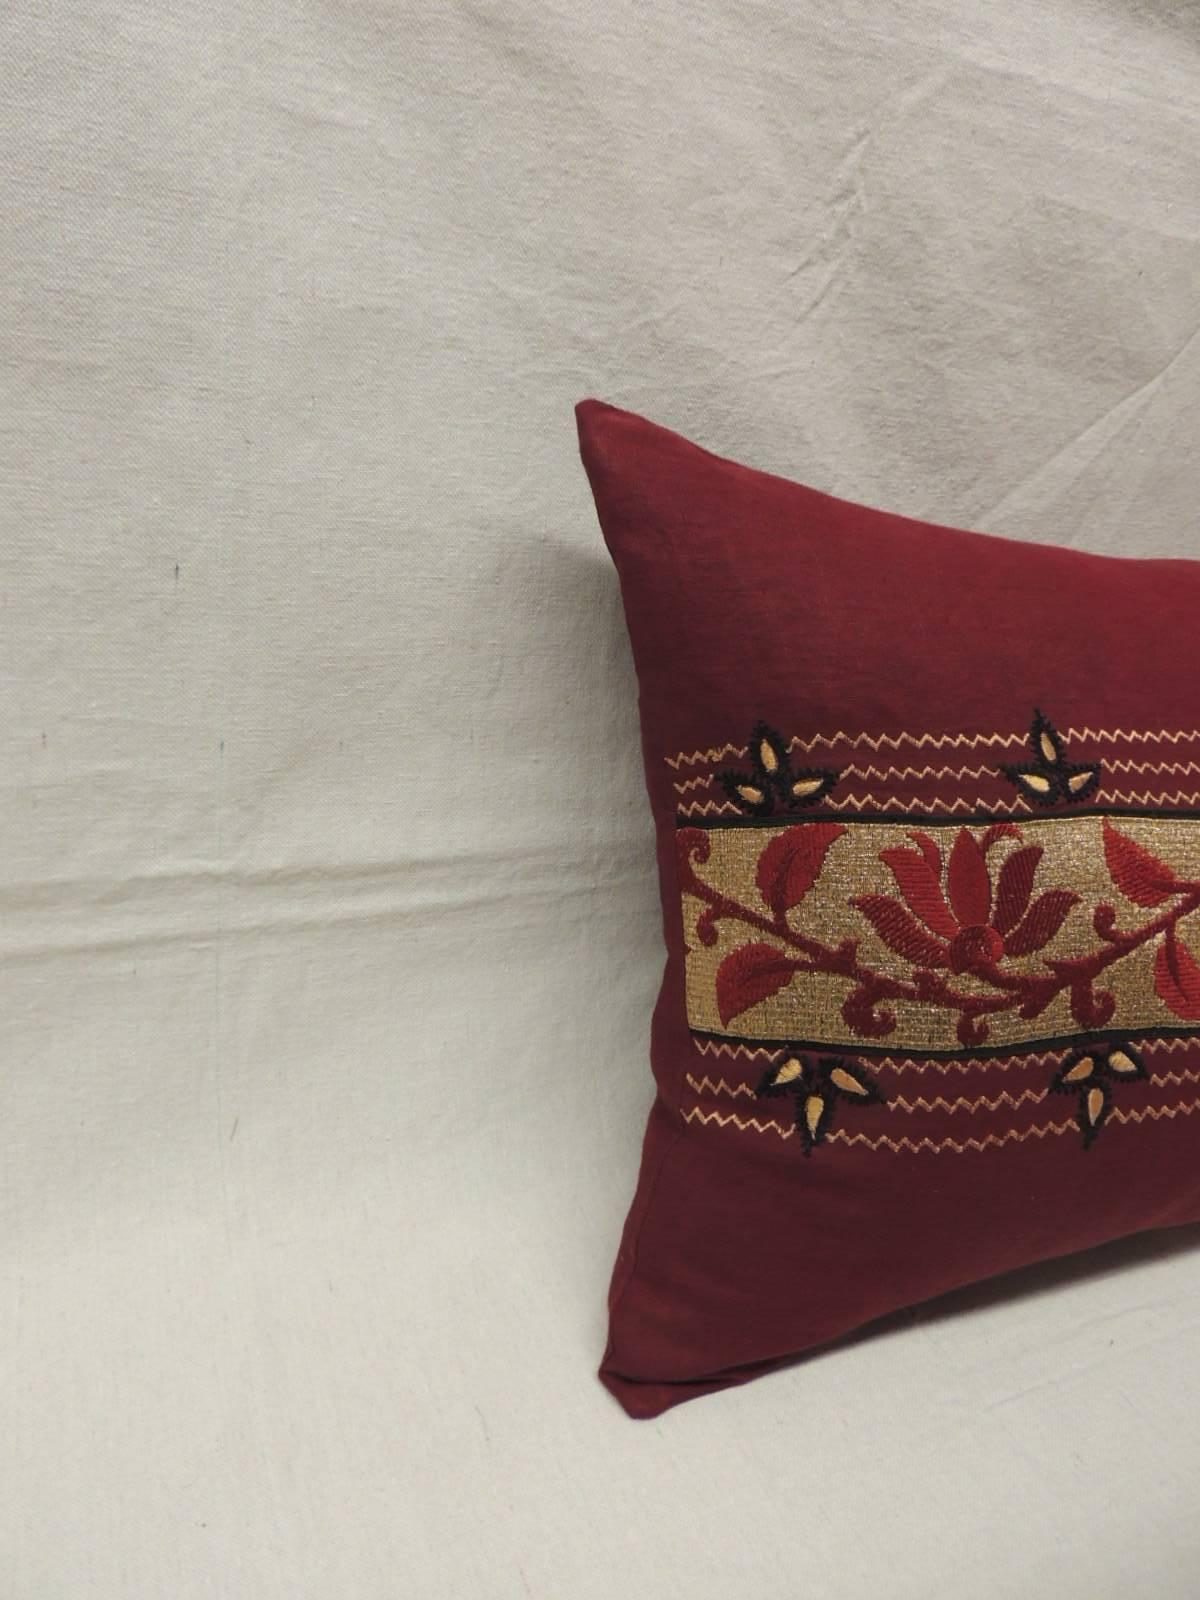 Antique Textiles Galleries...
Vintage 1960s embroidered metallic threads on linen pillow.
Vintage Indian burgundy long bolster pillow with a floral design in shades of black, burgundy, gold and red.. Same linen backing.  Decorative pillow